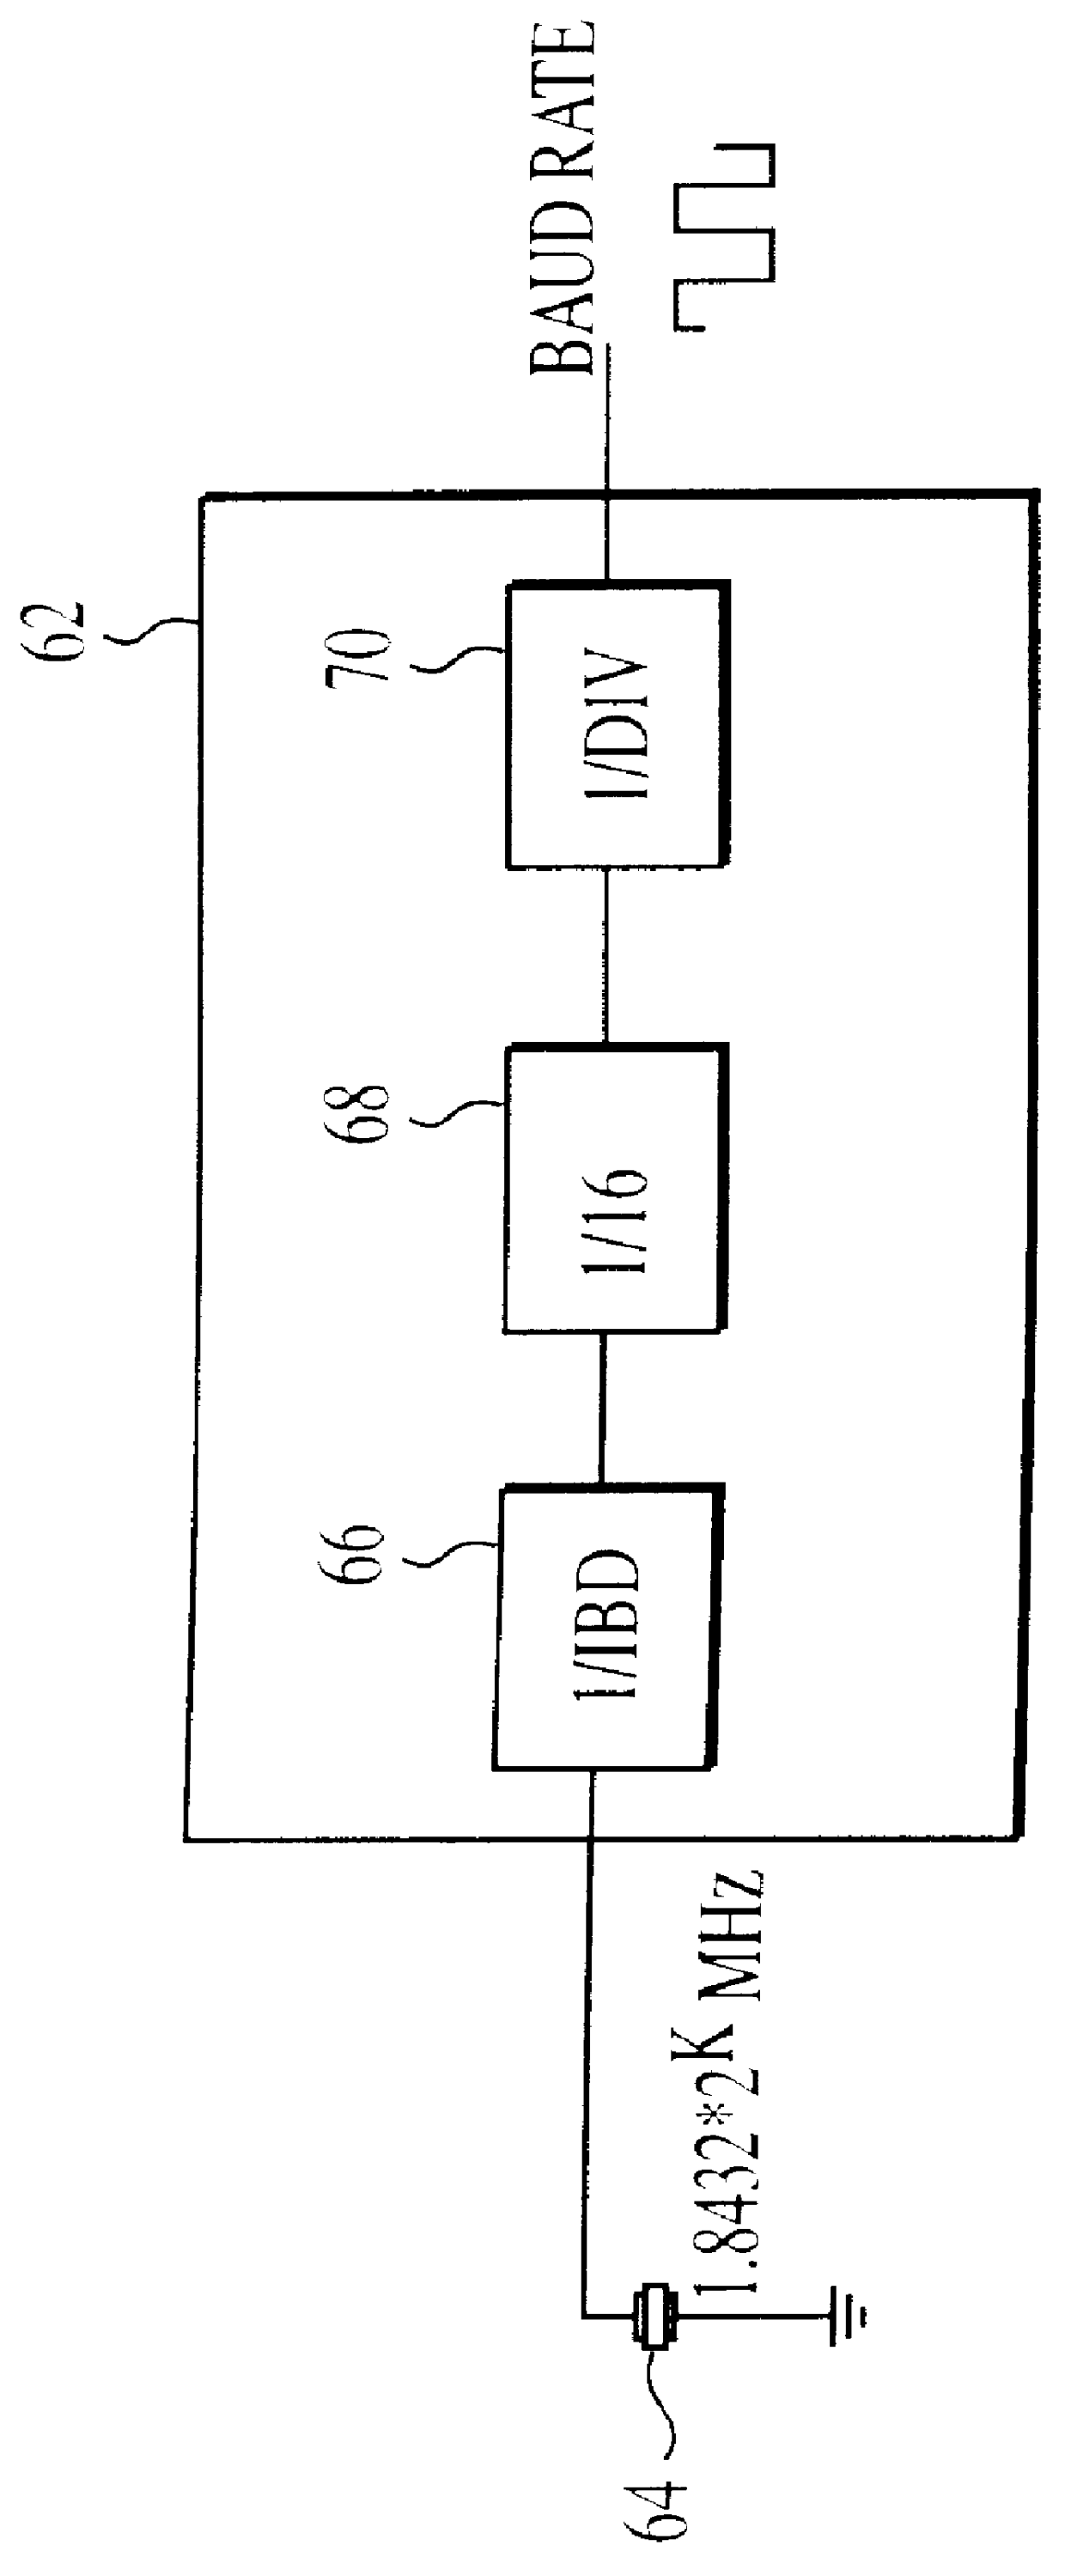 System for operating a universal asynchronous receiver/transmitter (UART) at speeds higher than 115,200 bps while maintaining full software and hardware backward compatibility